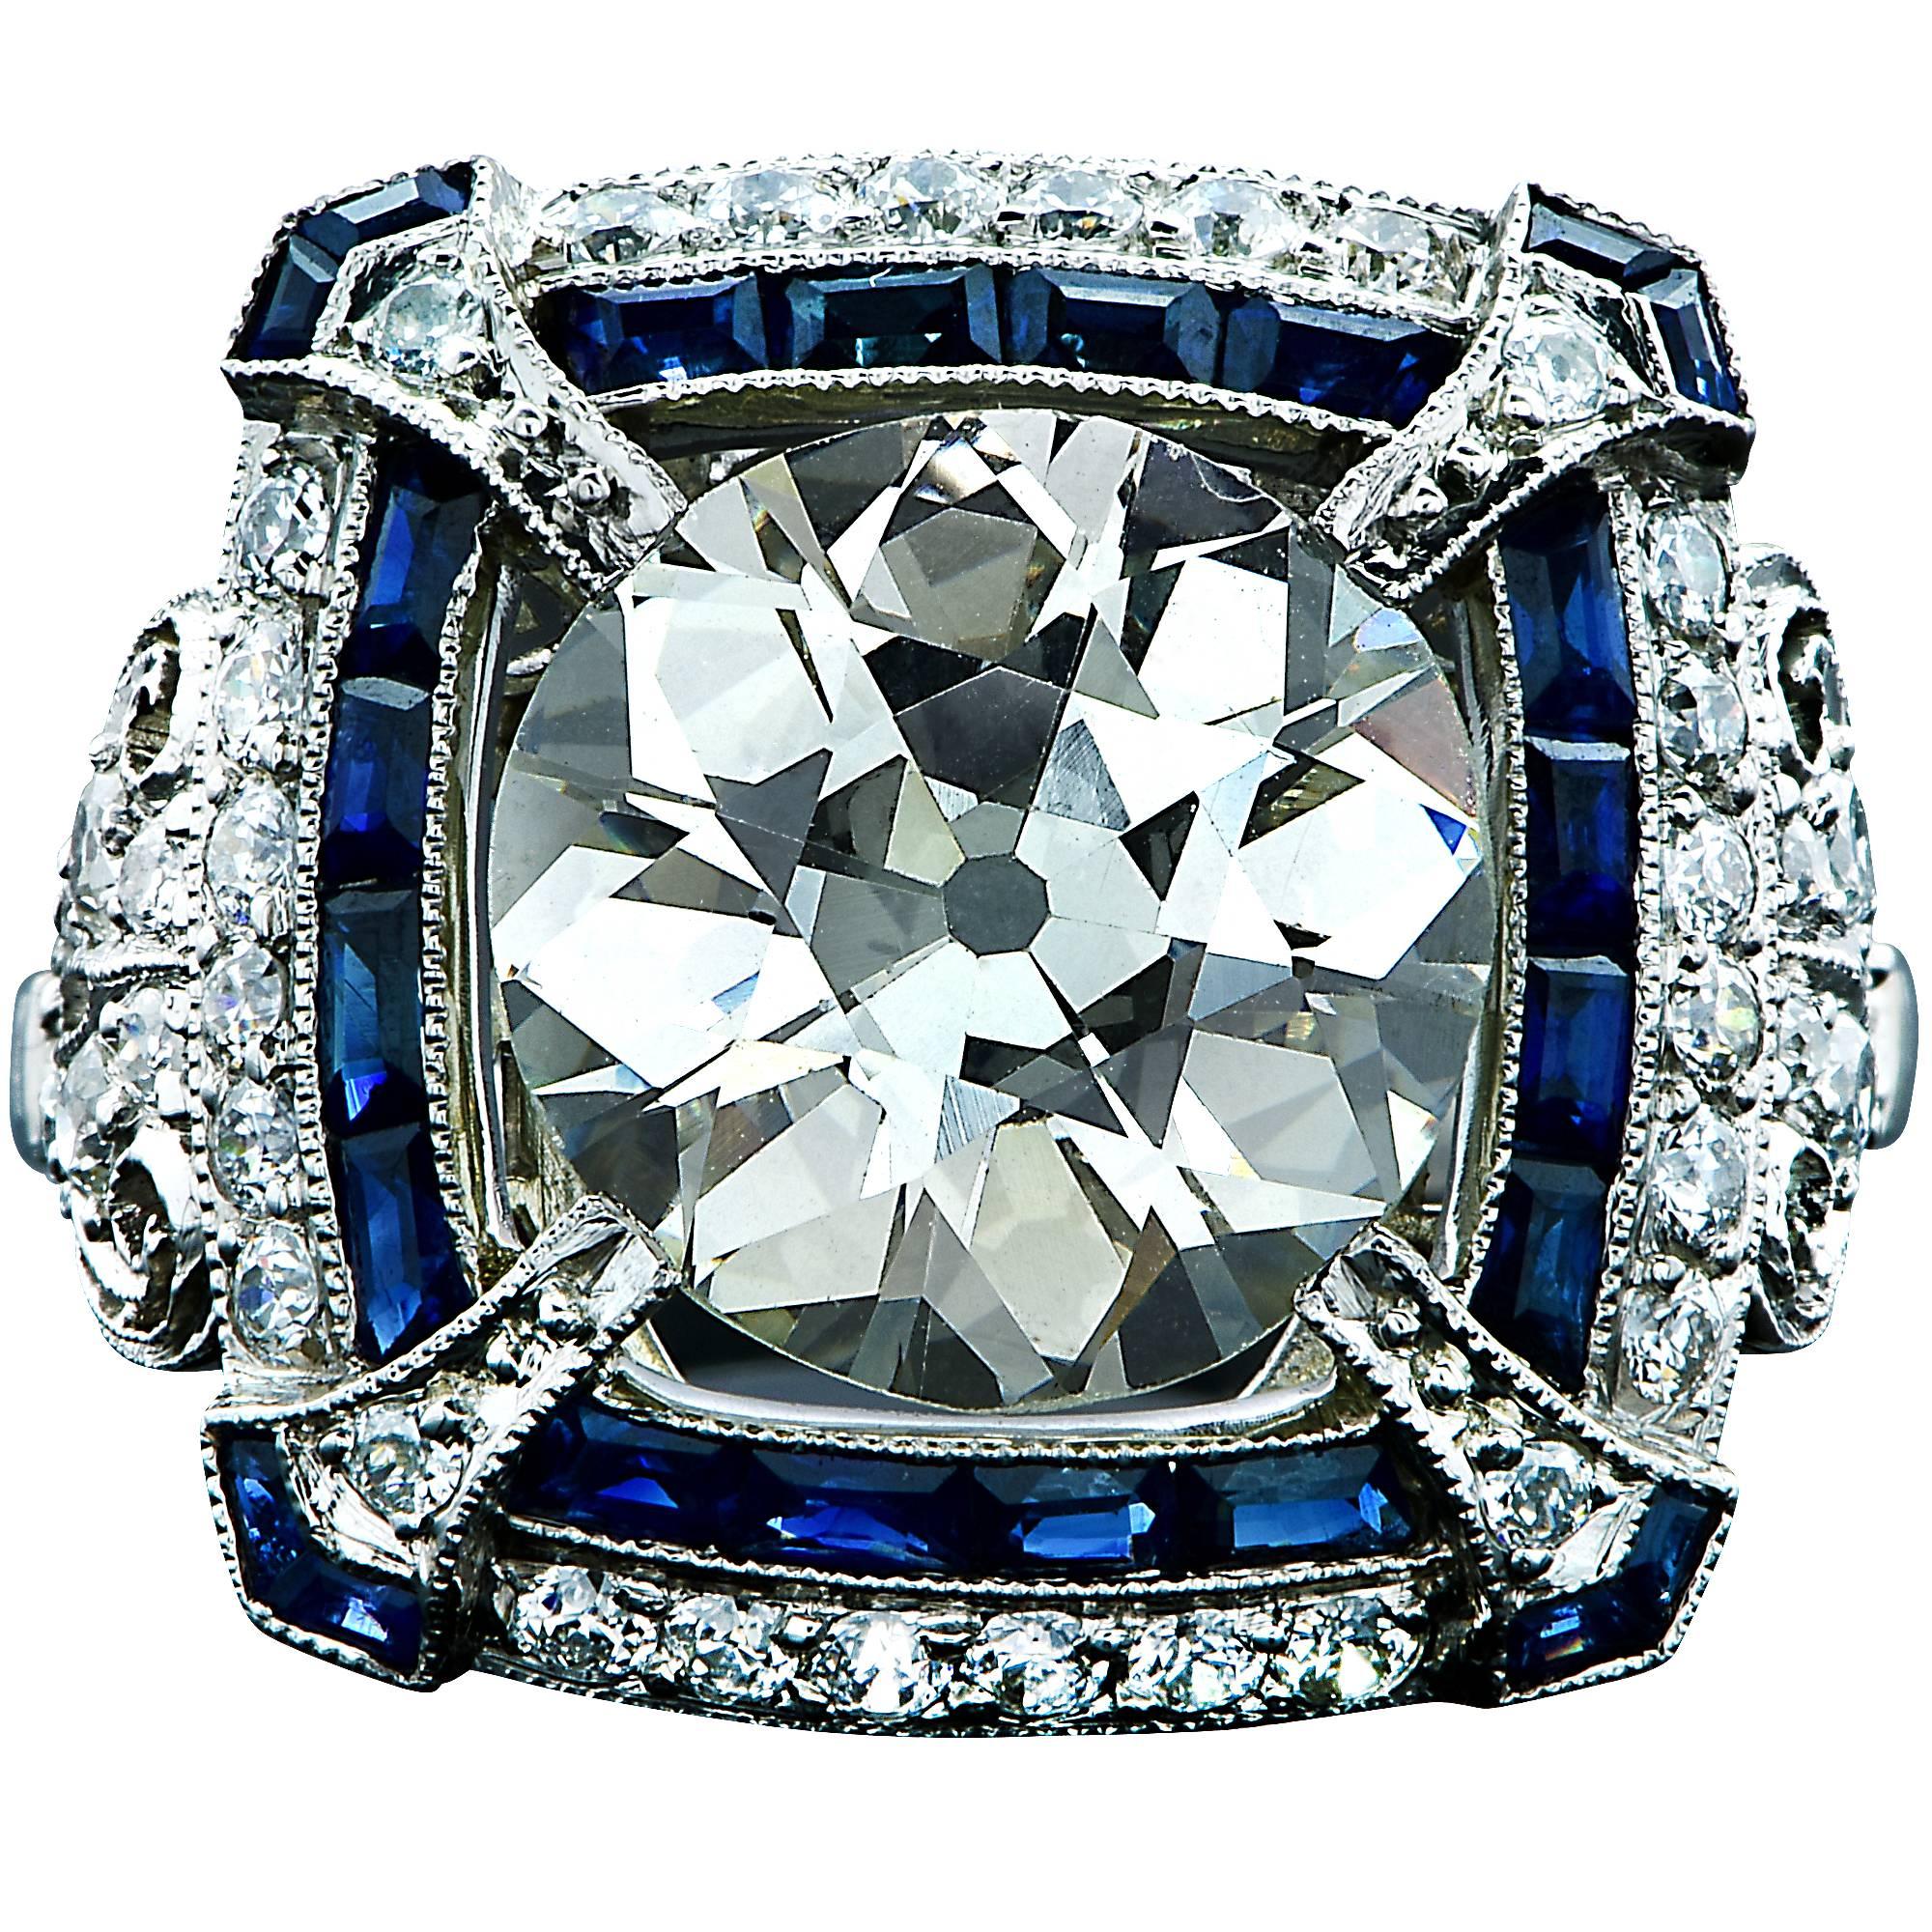 Platinum ring containing a 3.80ct European cut diamond M color and VS clarity surrounded by 24 custom cut sapphires weighing approximately .75cts and 52 European cut diamonds weighing approximately 1cts.

The ring is a size 6.5 and can be sized up